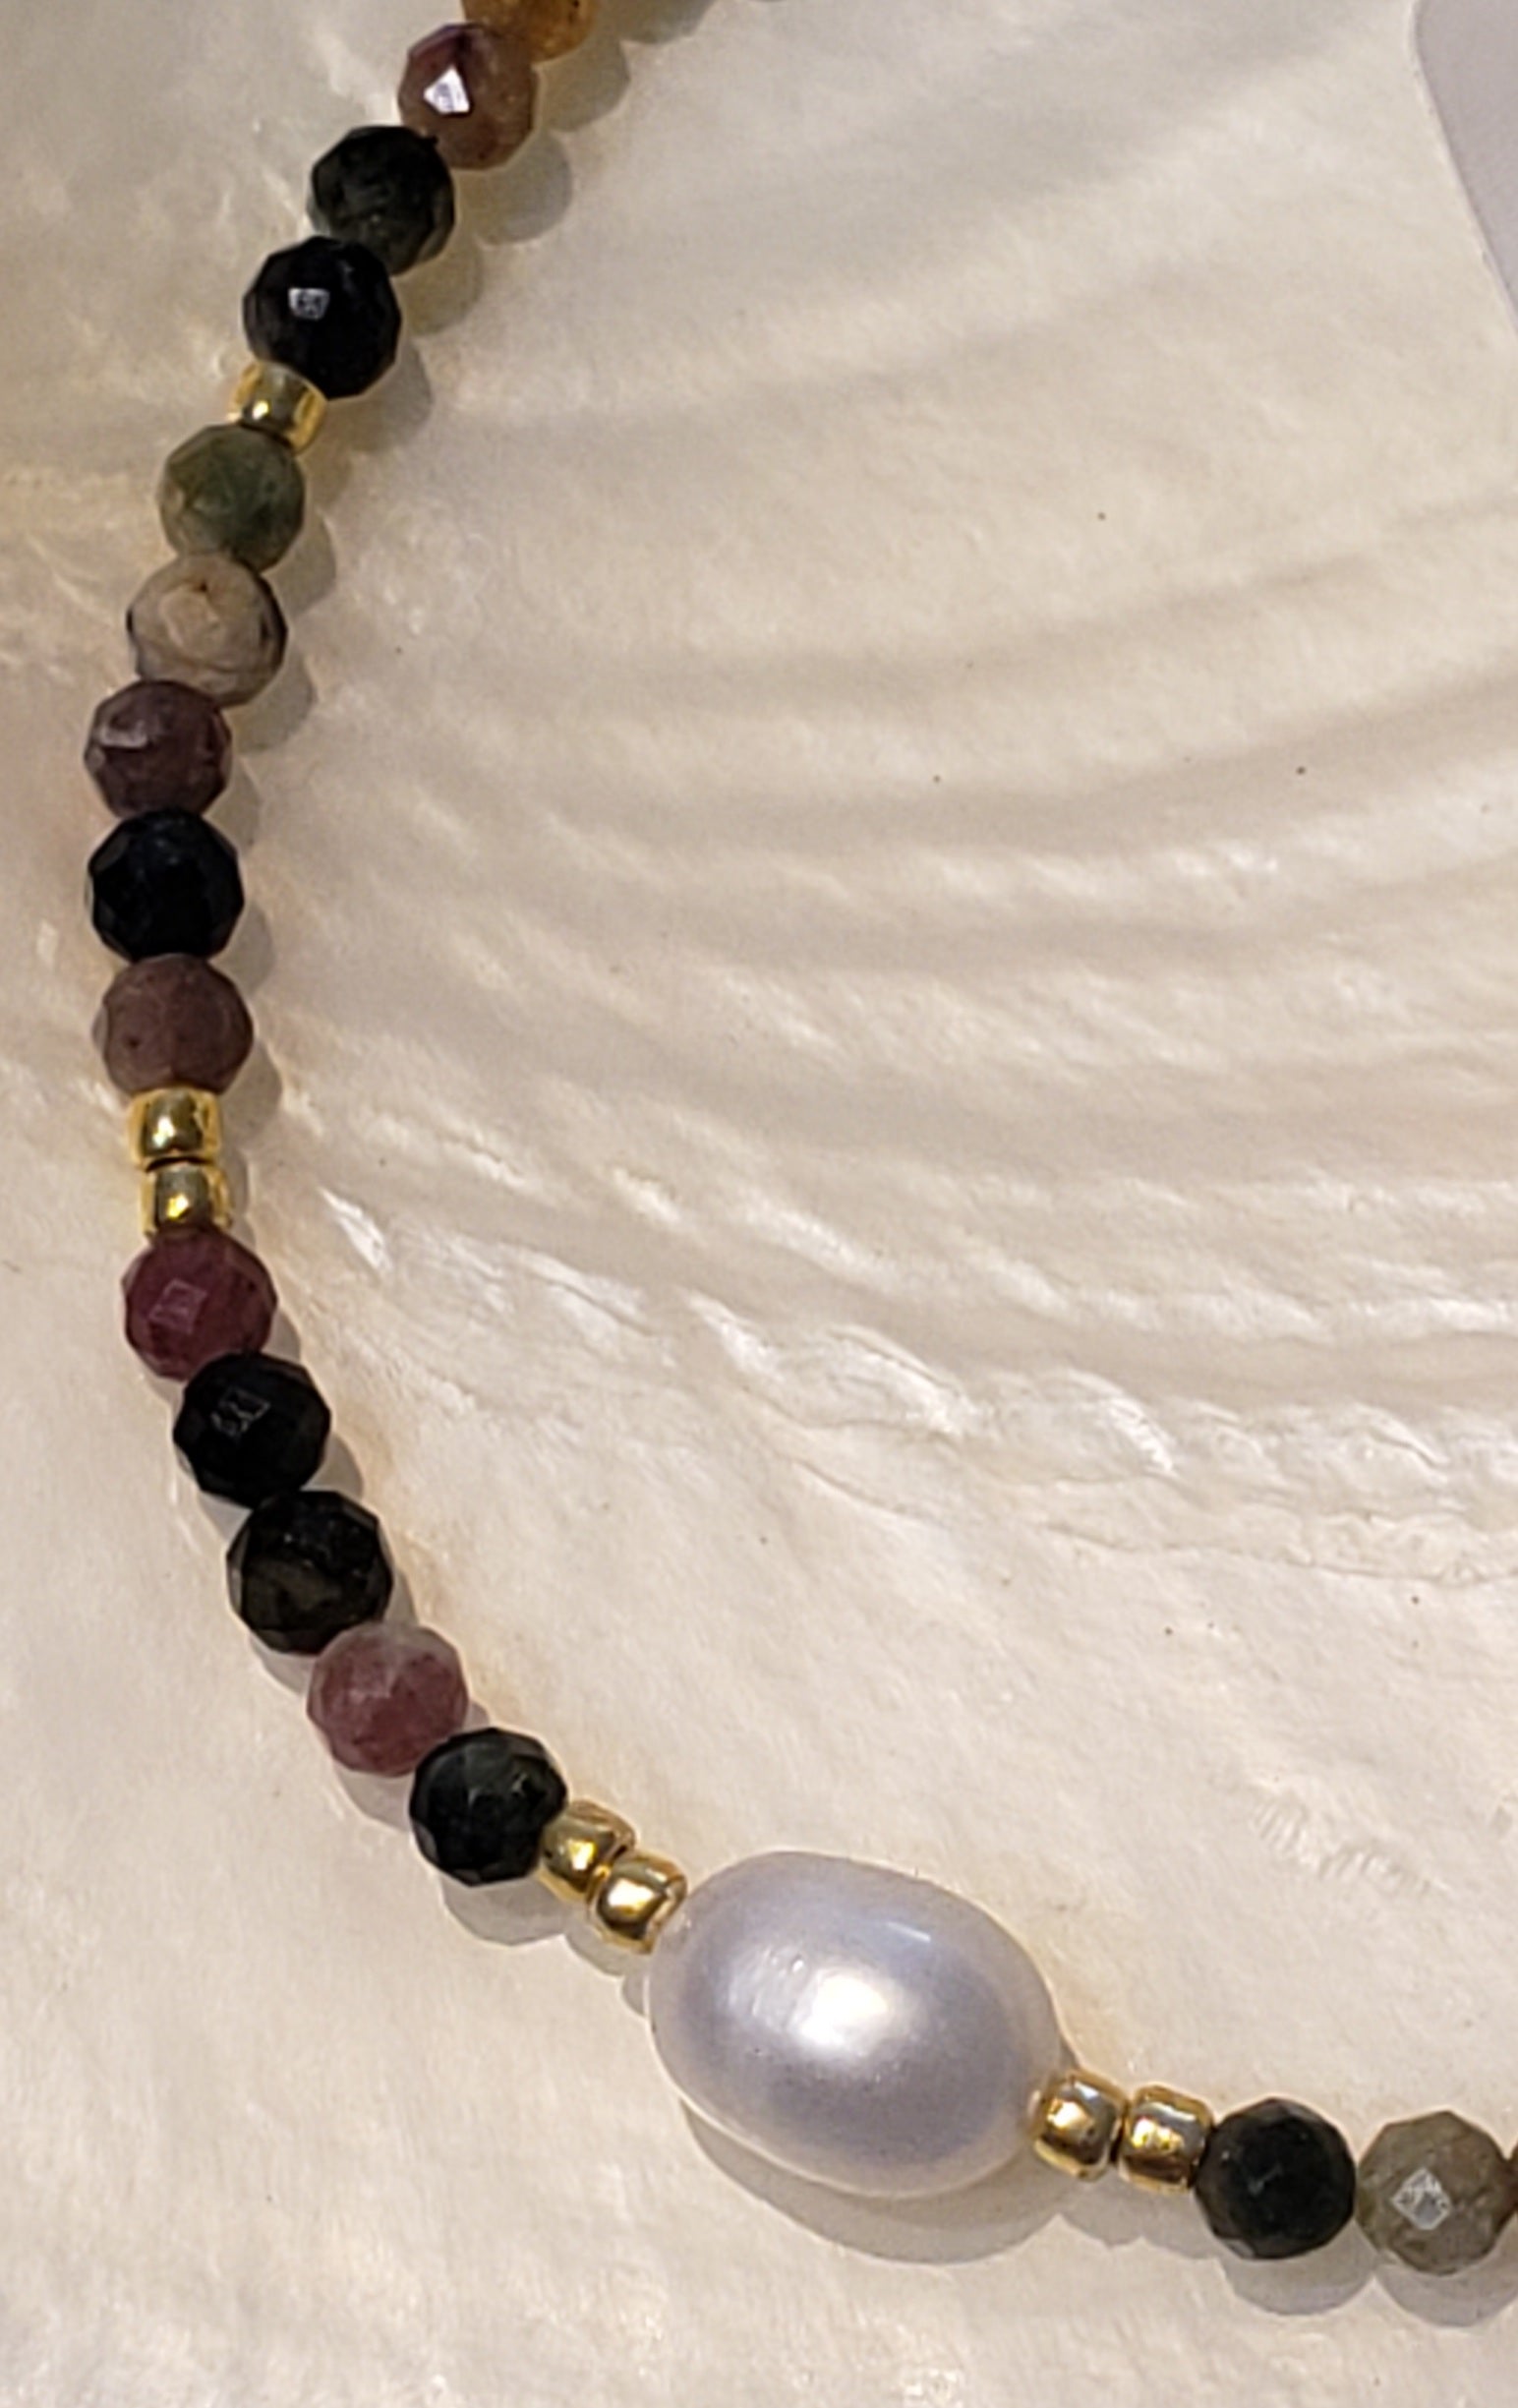 Necklace Rainbow Flourite and Fresh water Pearls Gold Filled